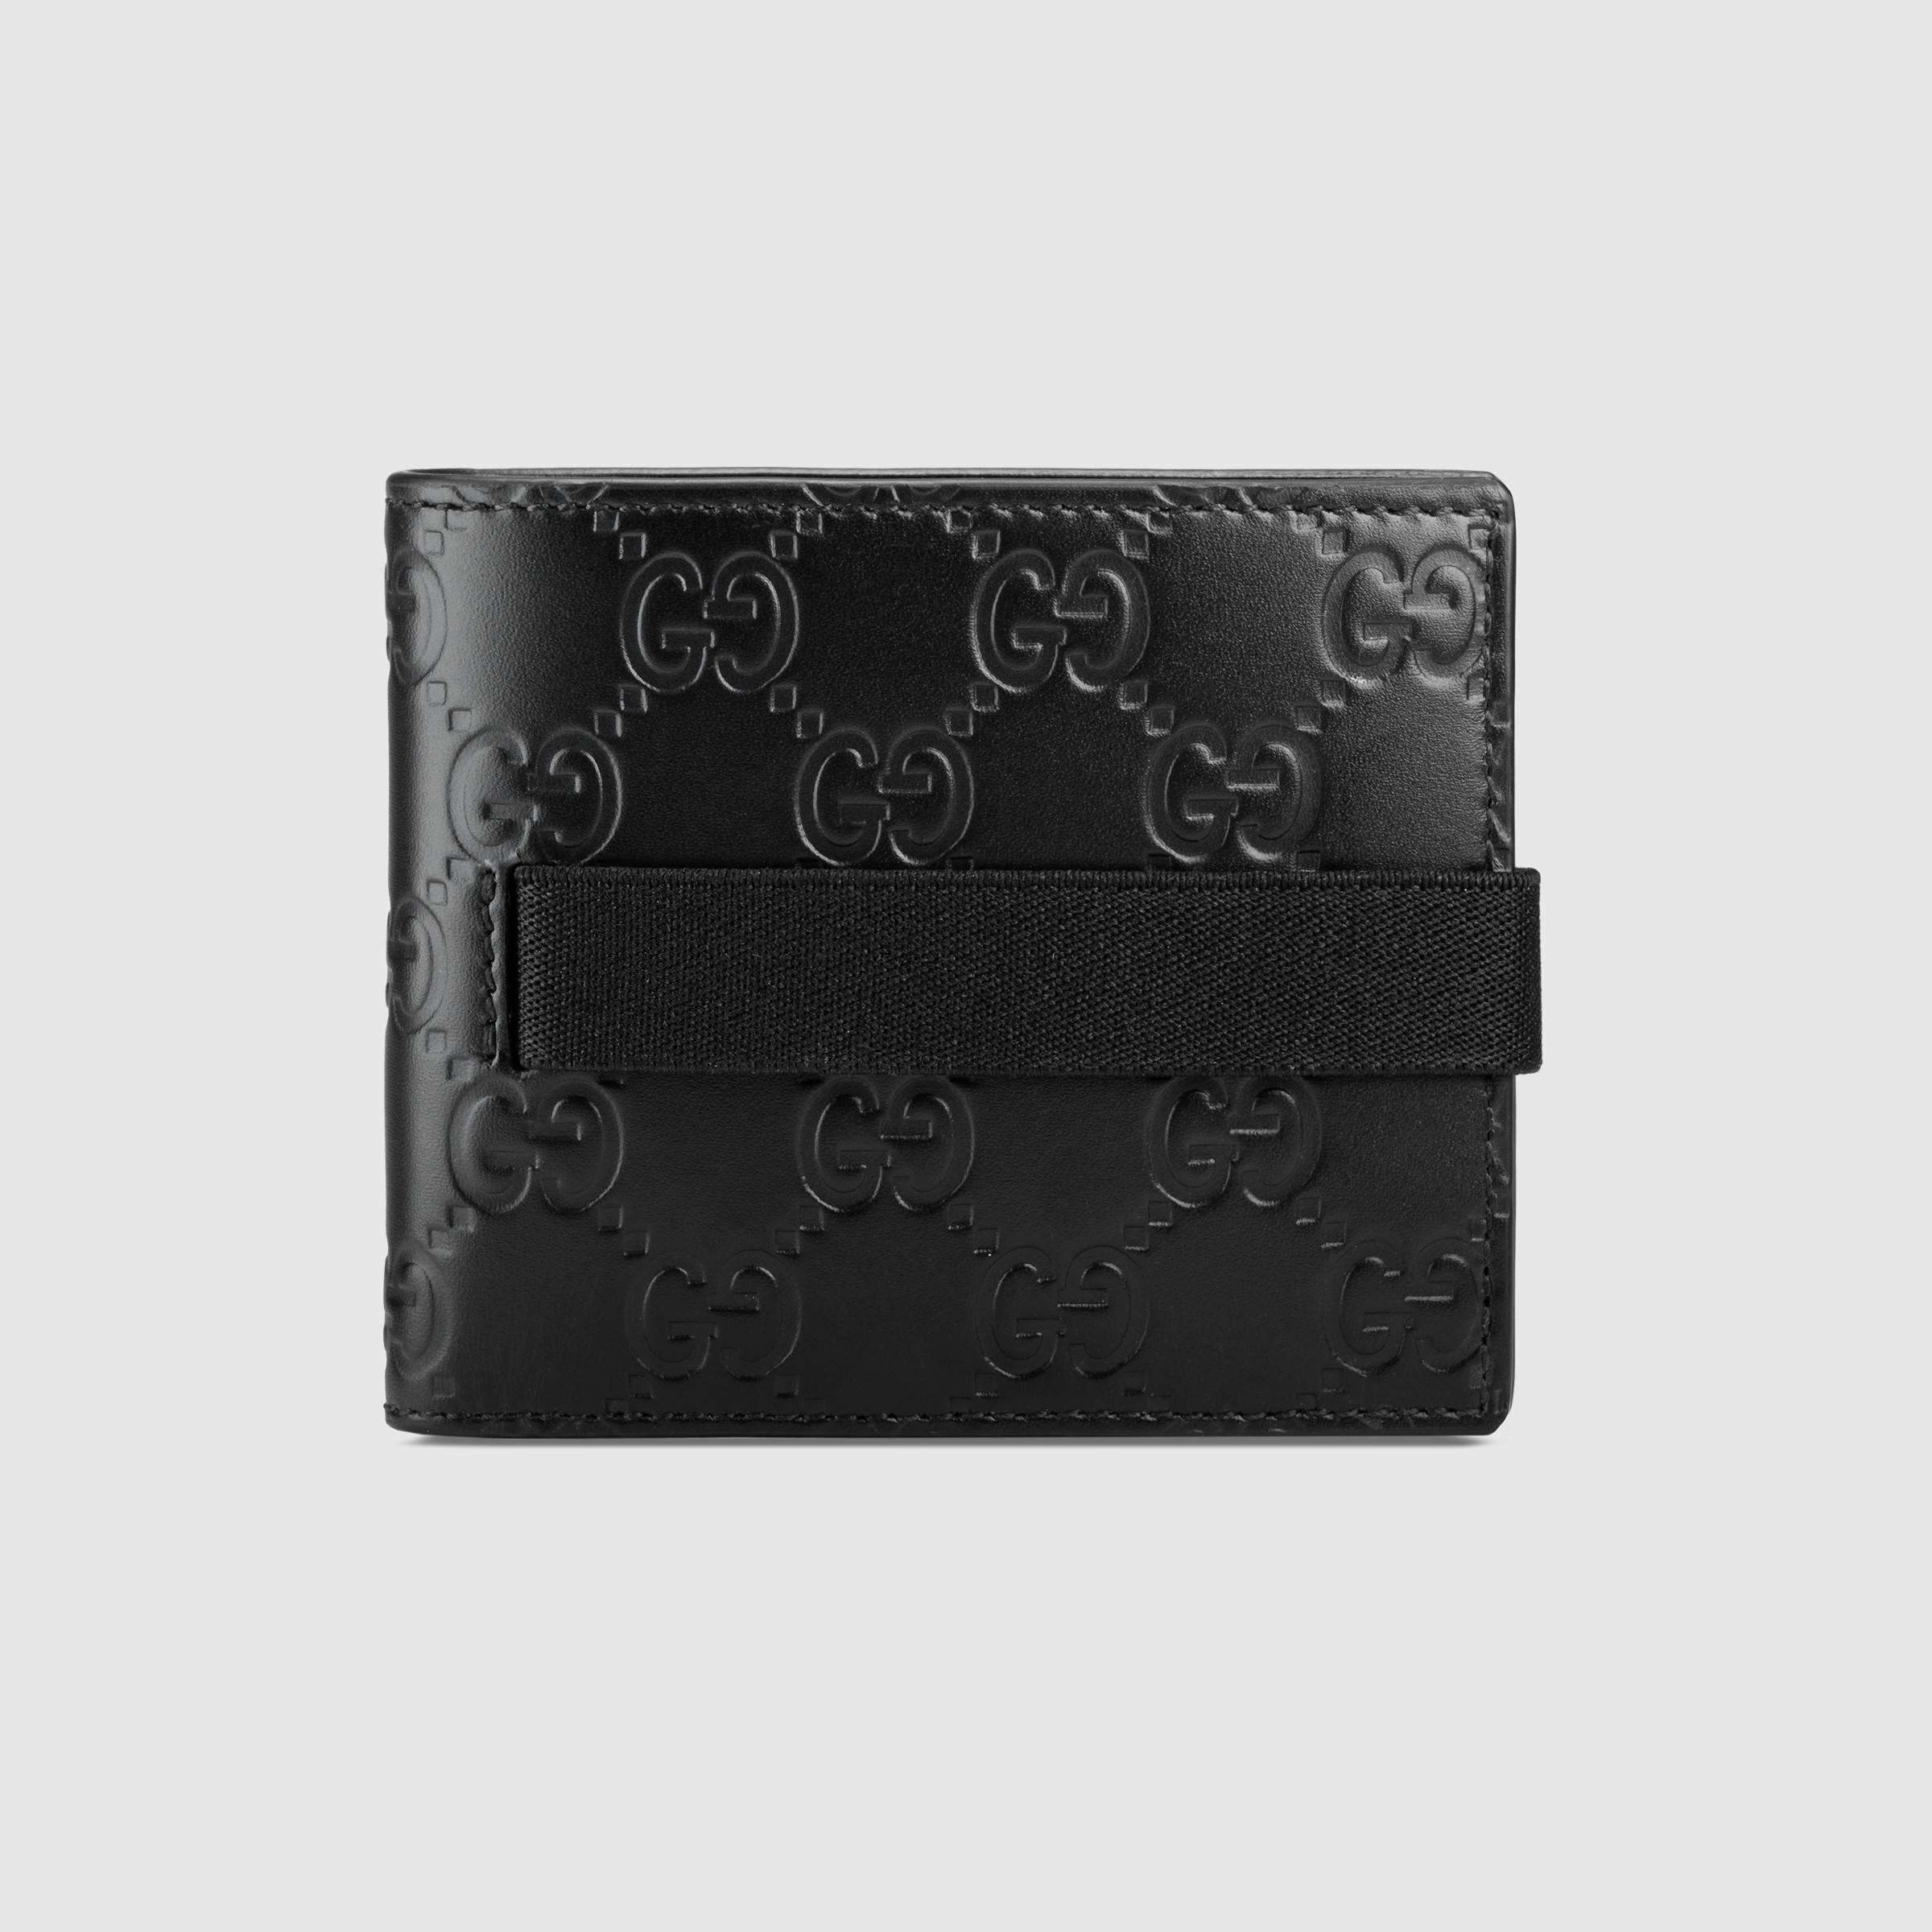 Gucci Leather Elastic Signature Wallet in Black for Men - Lyst